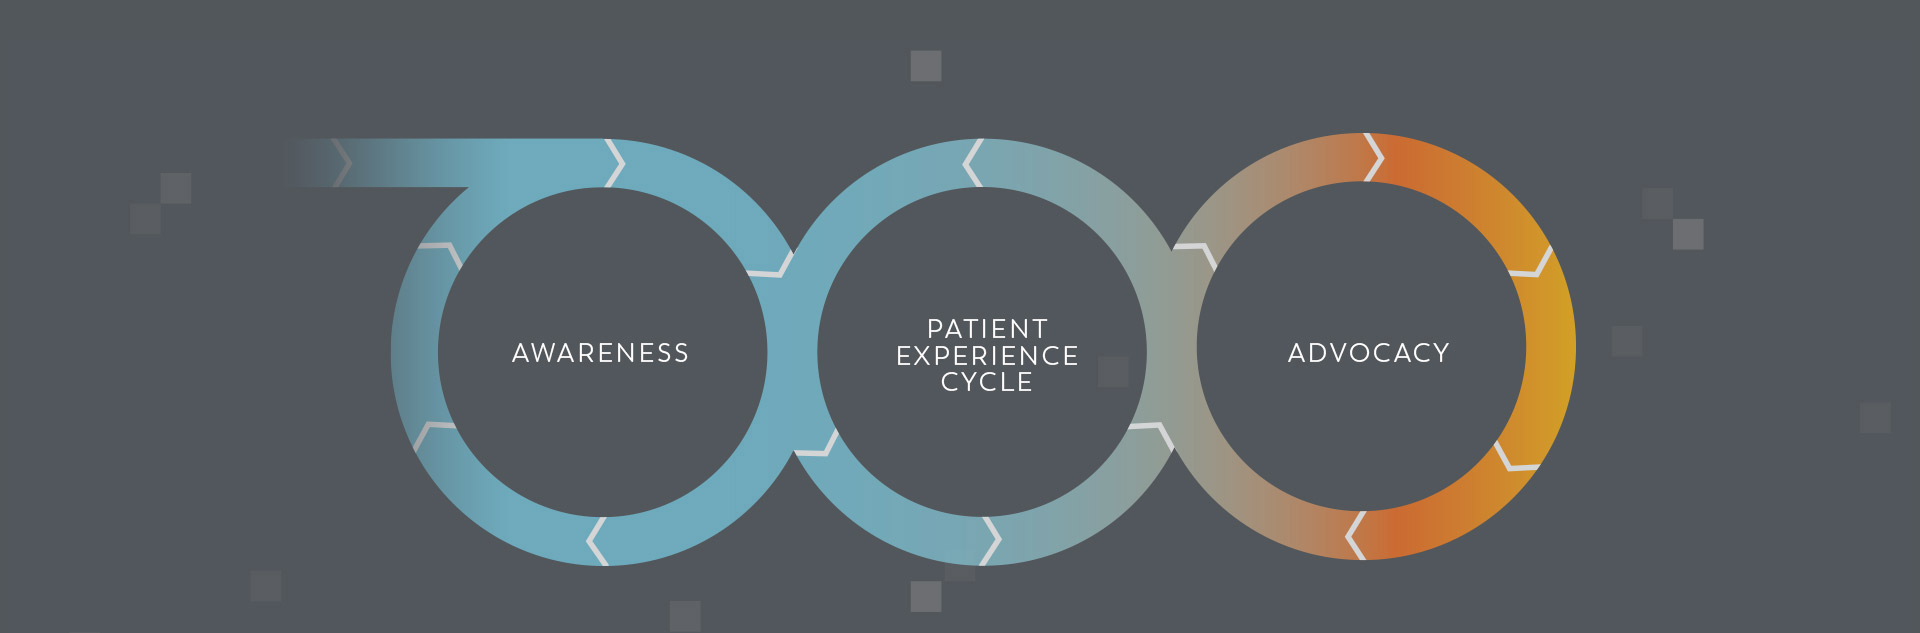 post acute care cycle